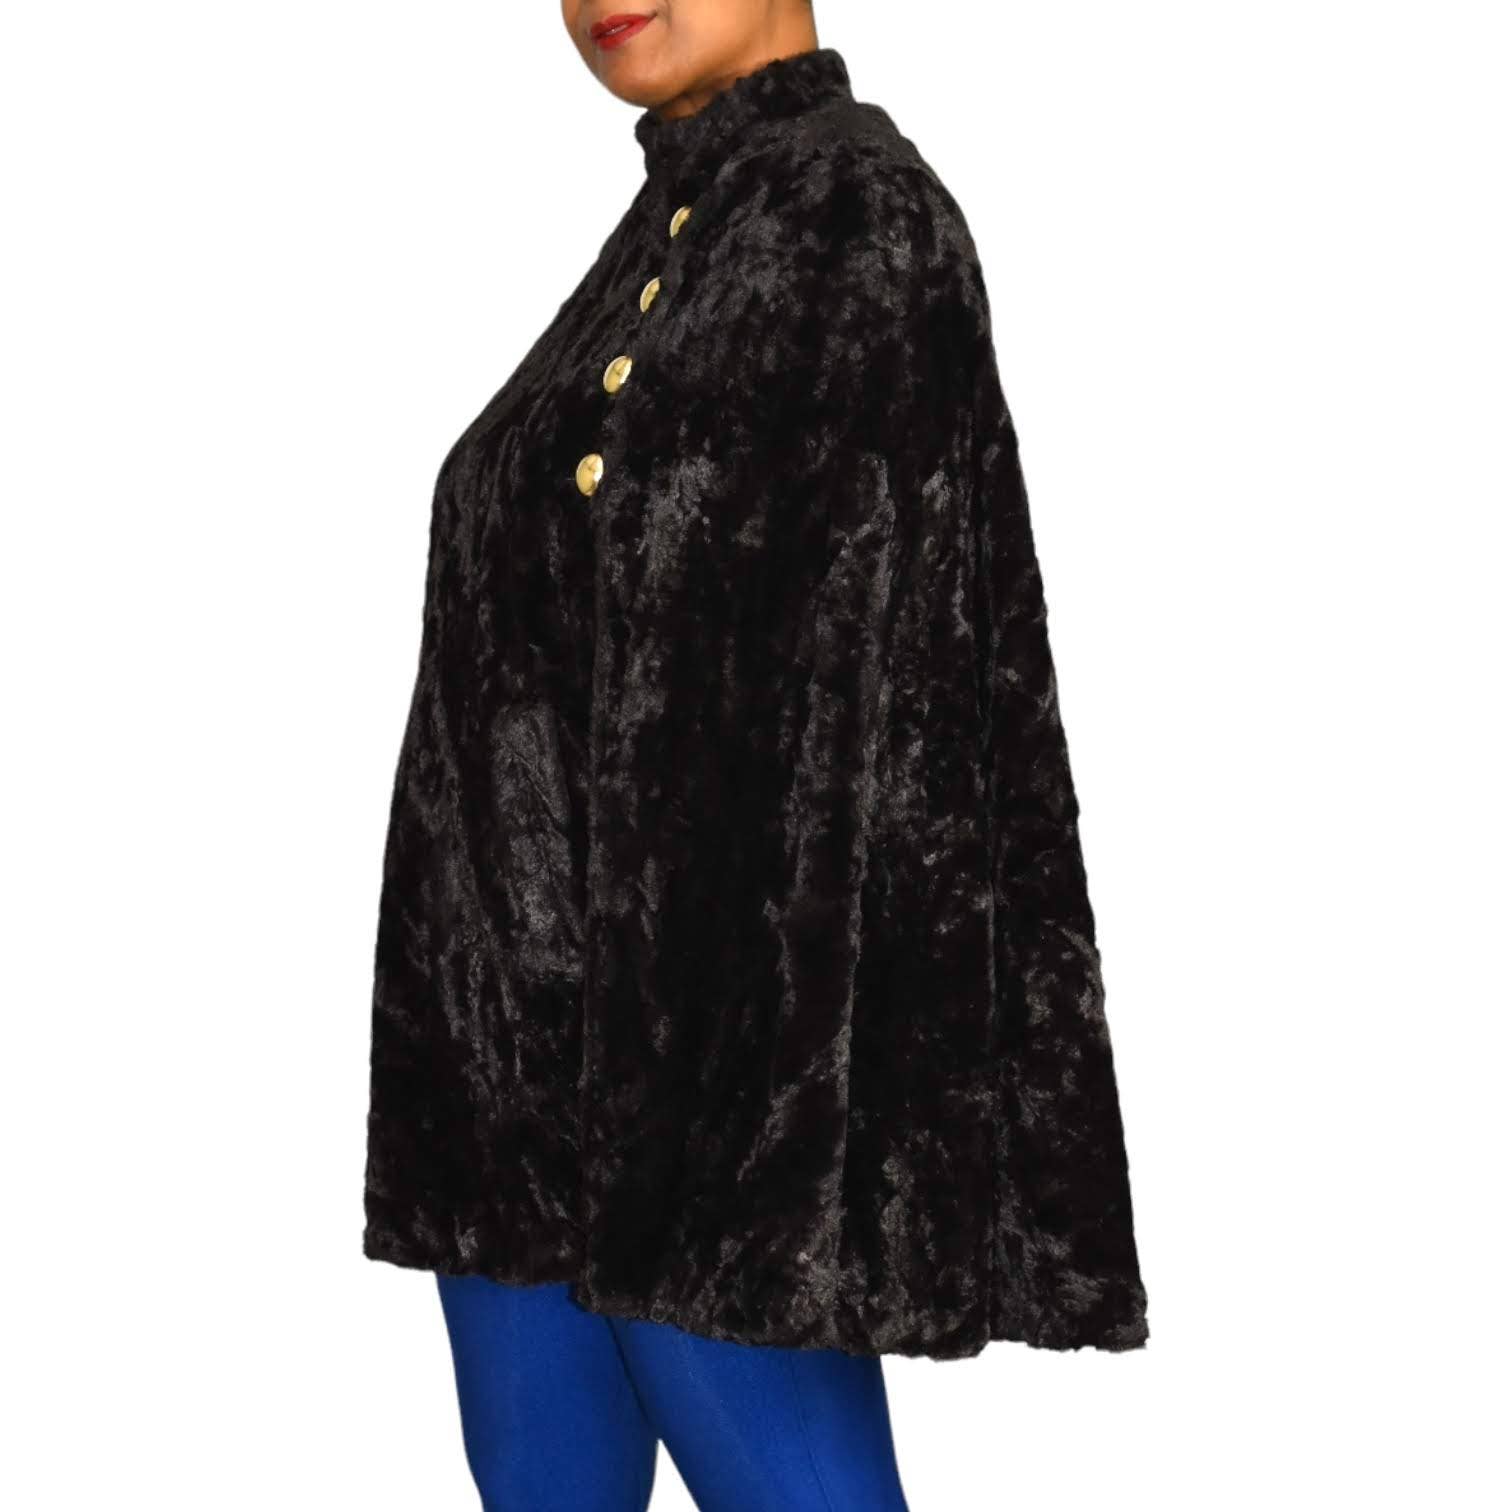 Vintage Faux Fur Cape Synthetic Dark Brown Crushed Velvet Pockets ILGWU Size Small